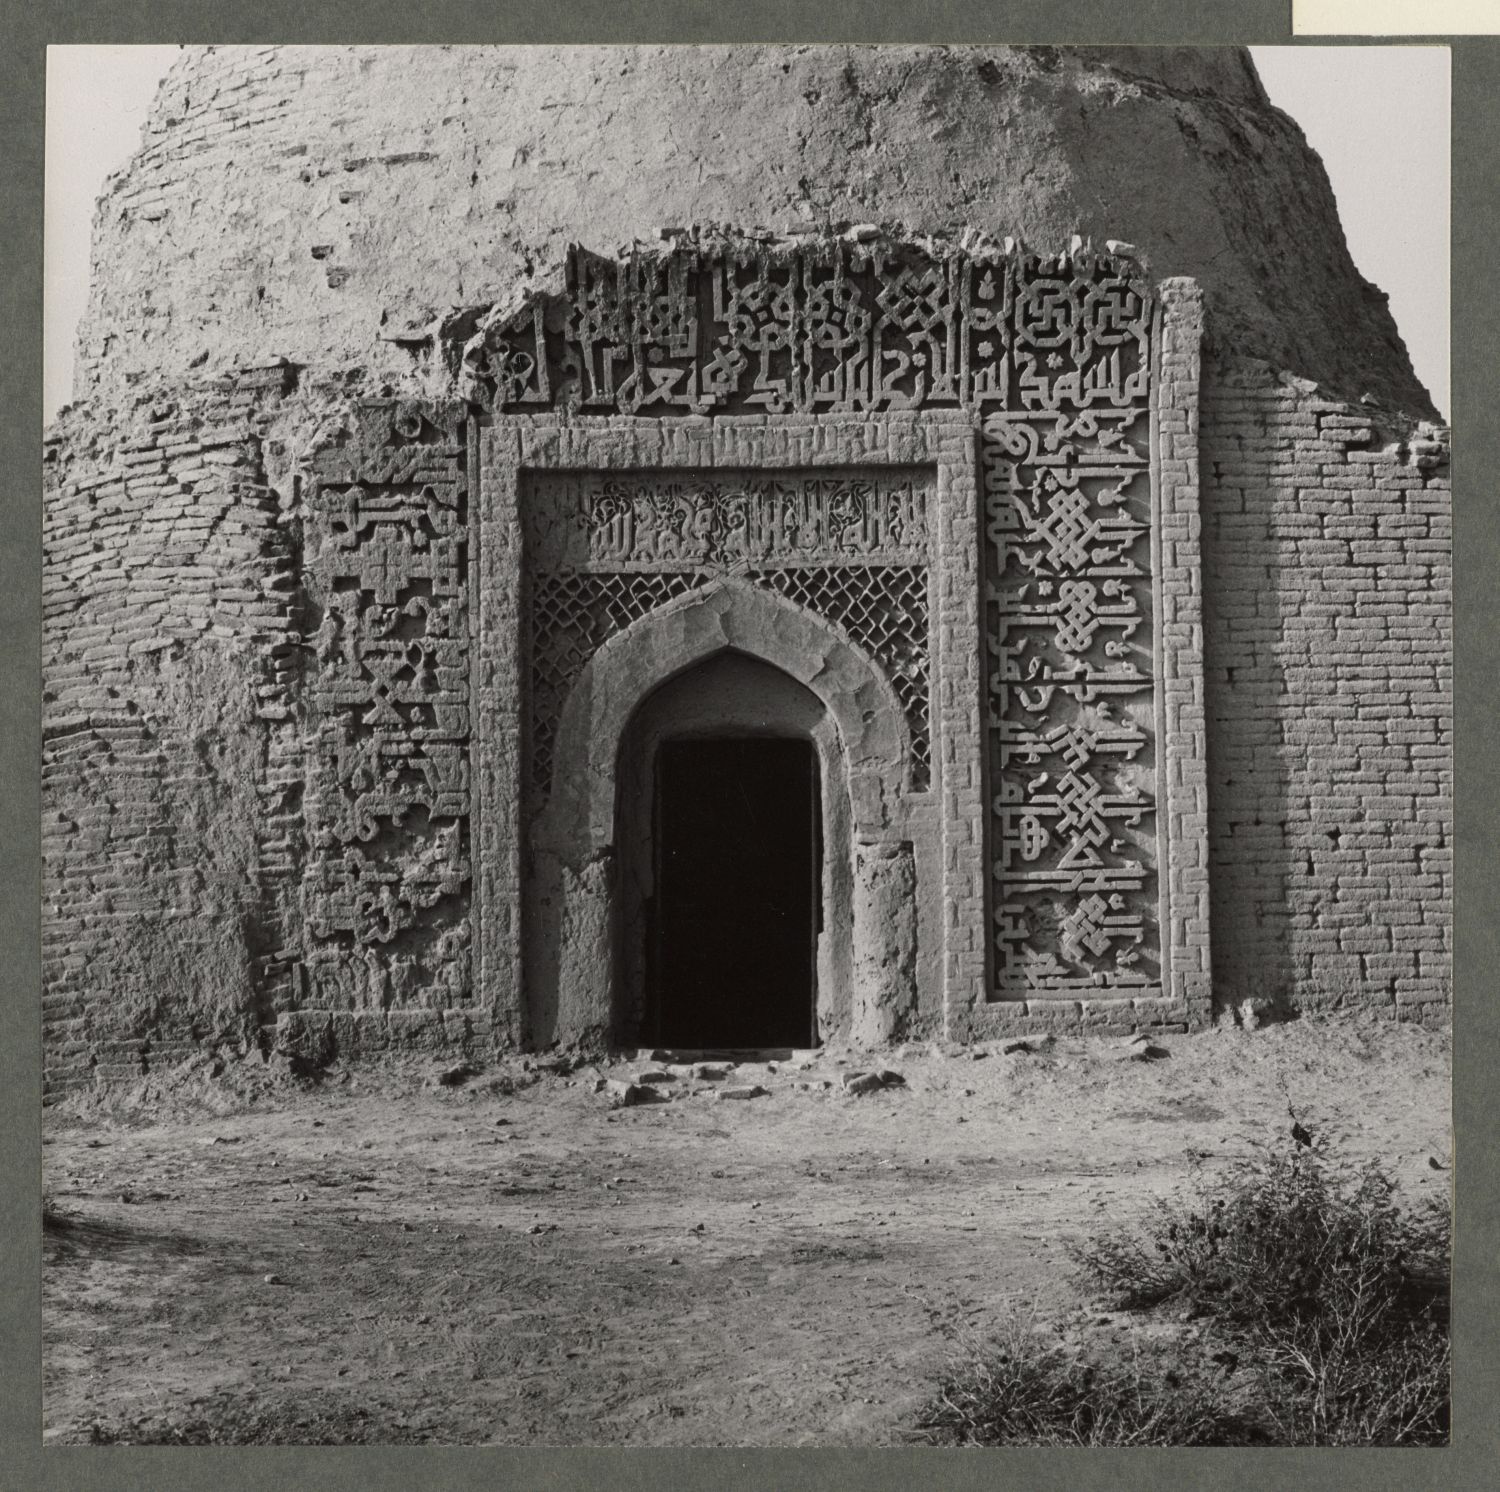 View of arched doorway with Kufic inscription.